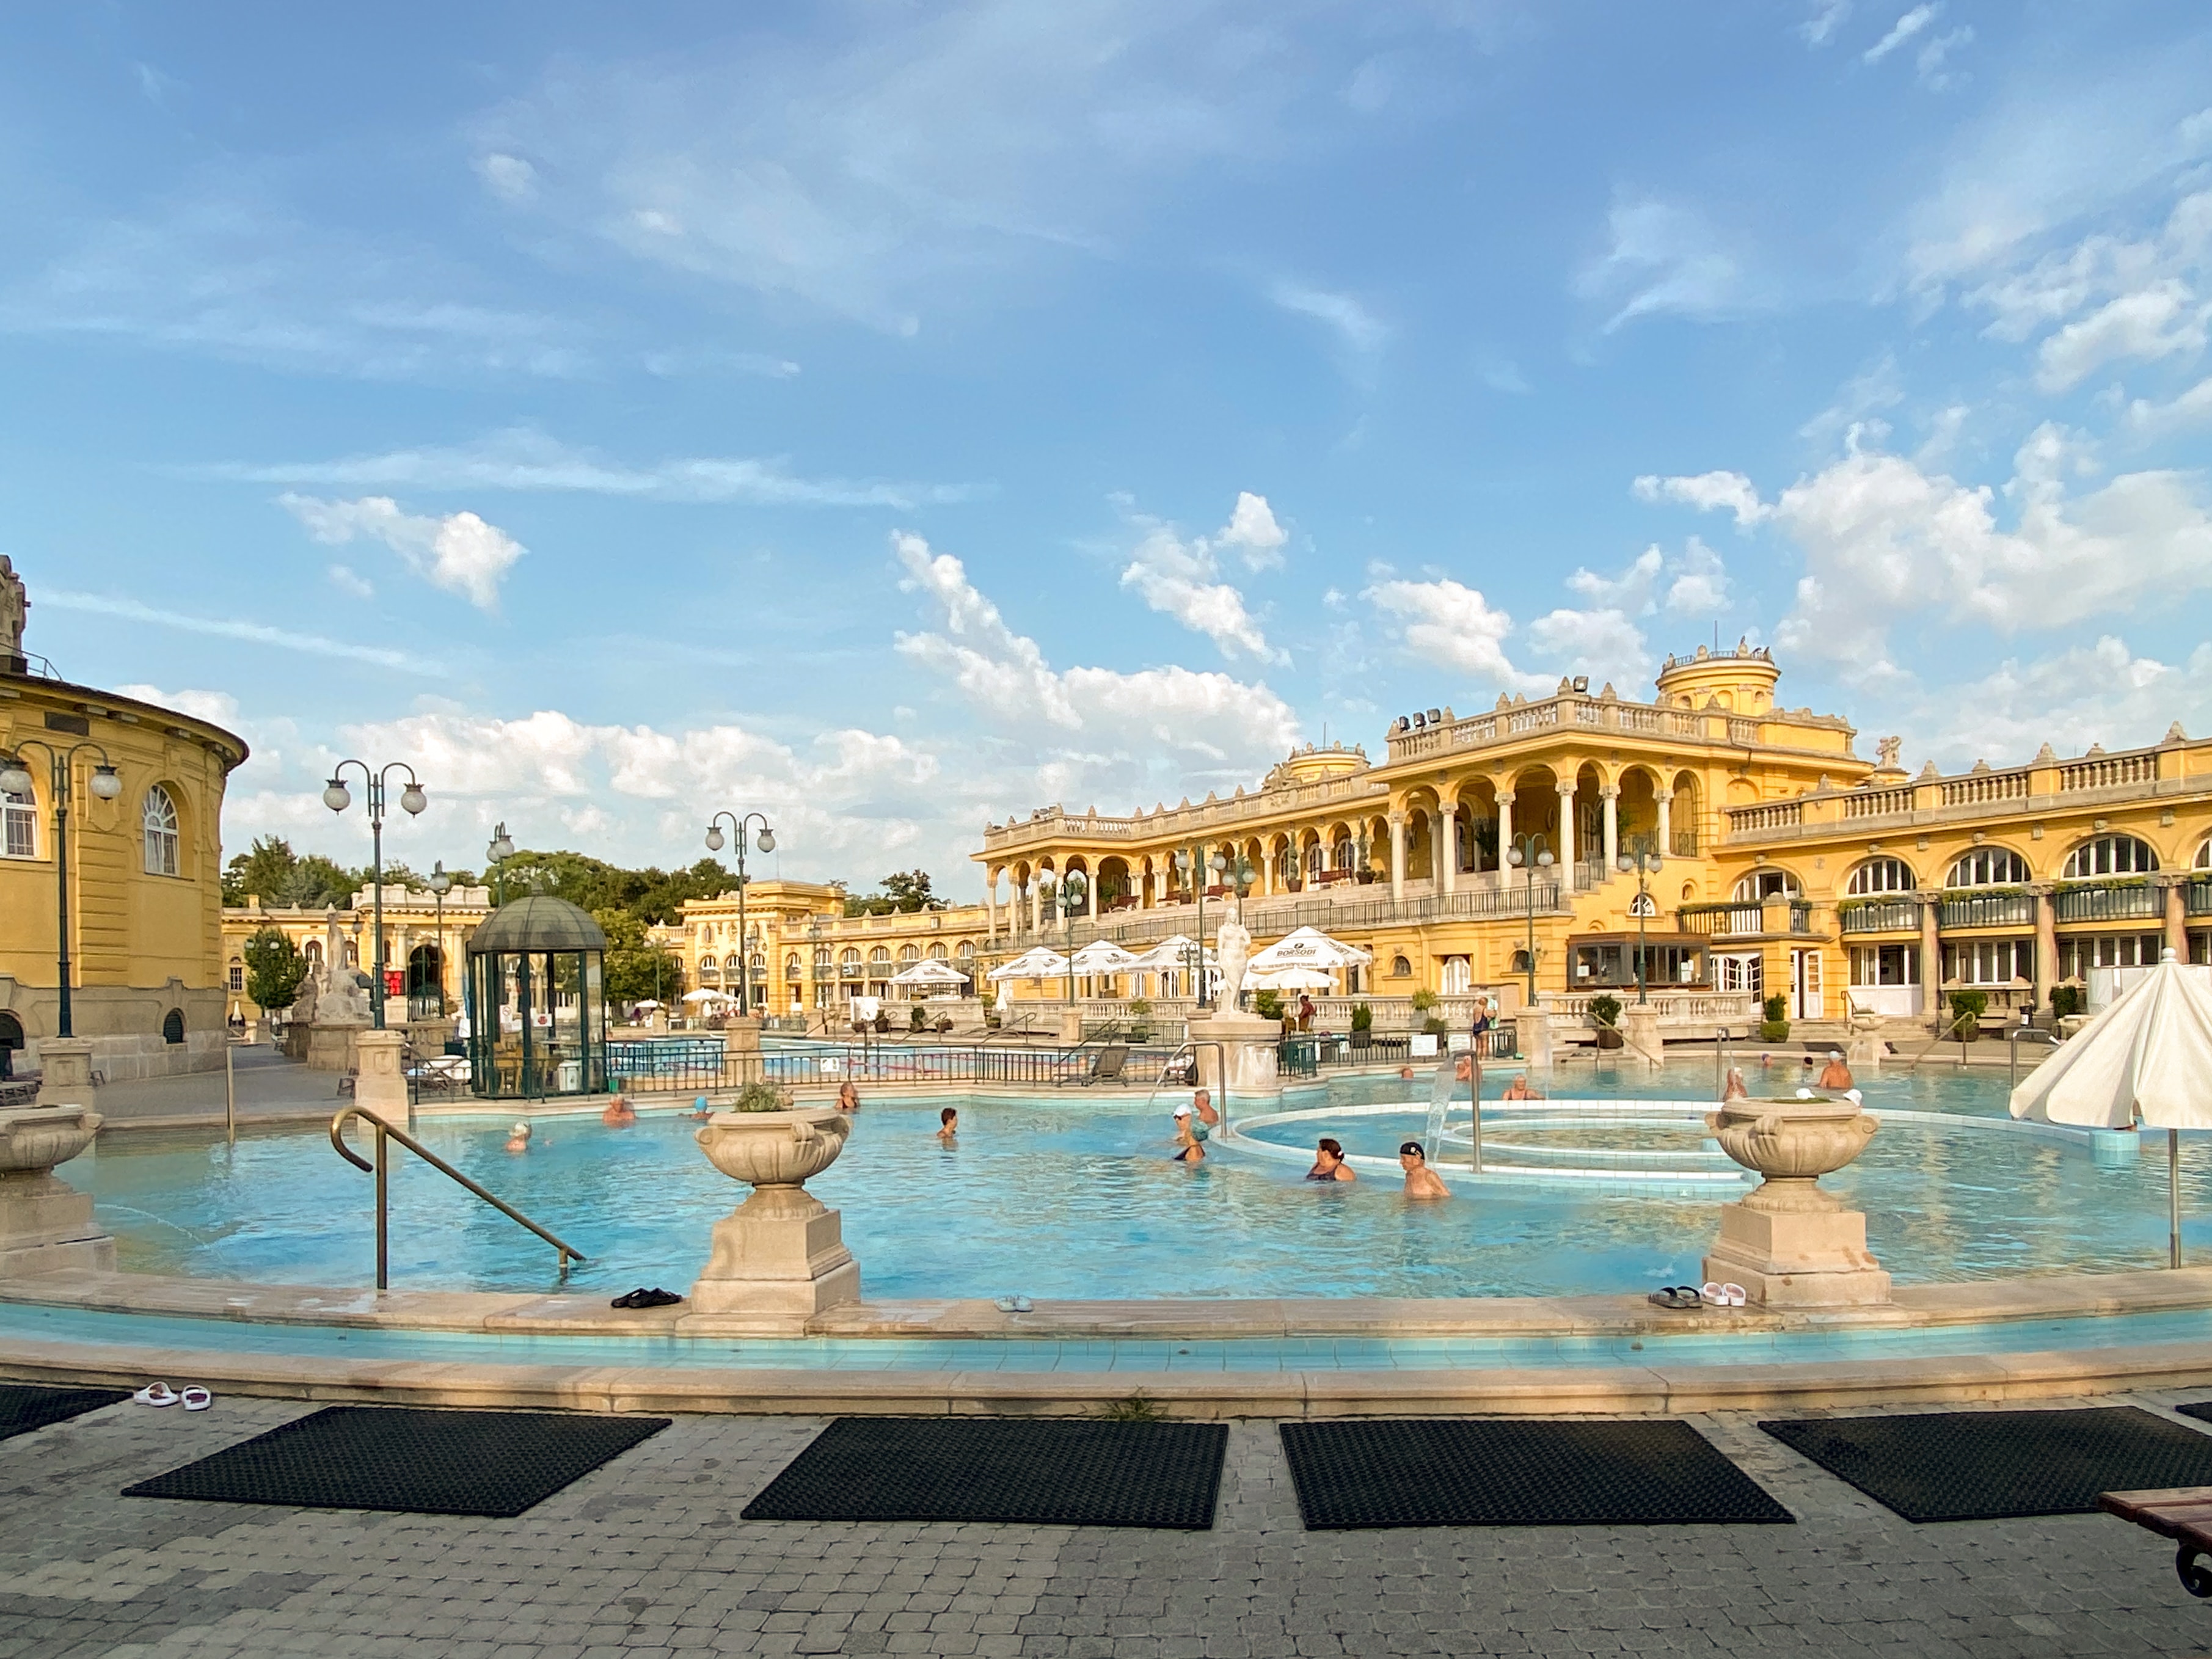 An outdoor thermal bath in EOR Hungary with visitors enjoying the water against the backdrop of a classical architecture building under a blue sky with scattered clouds.